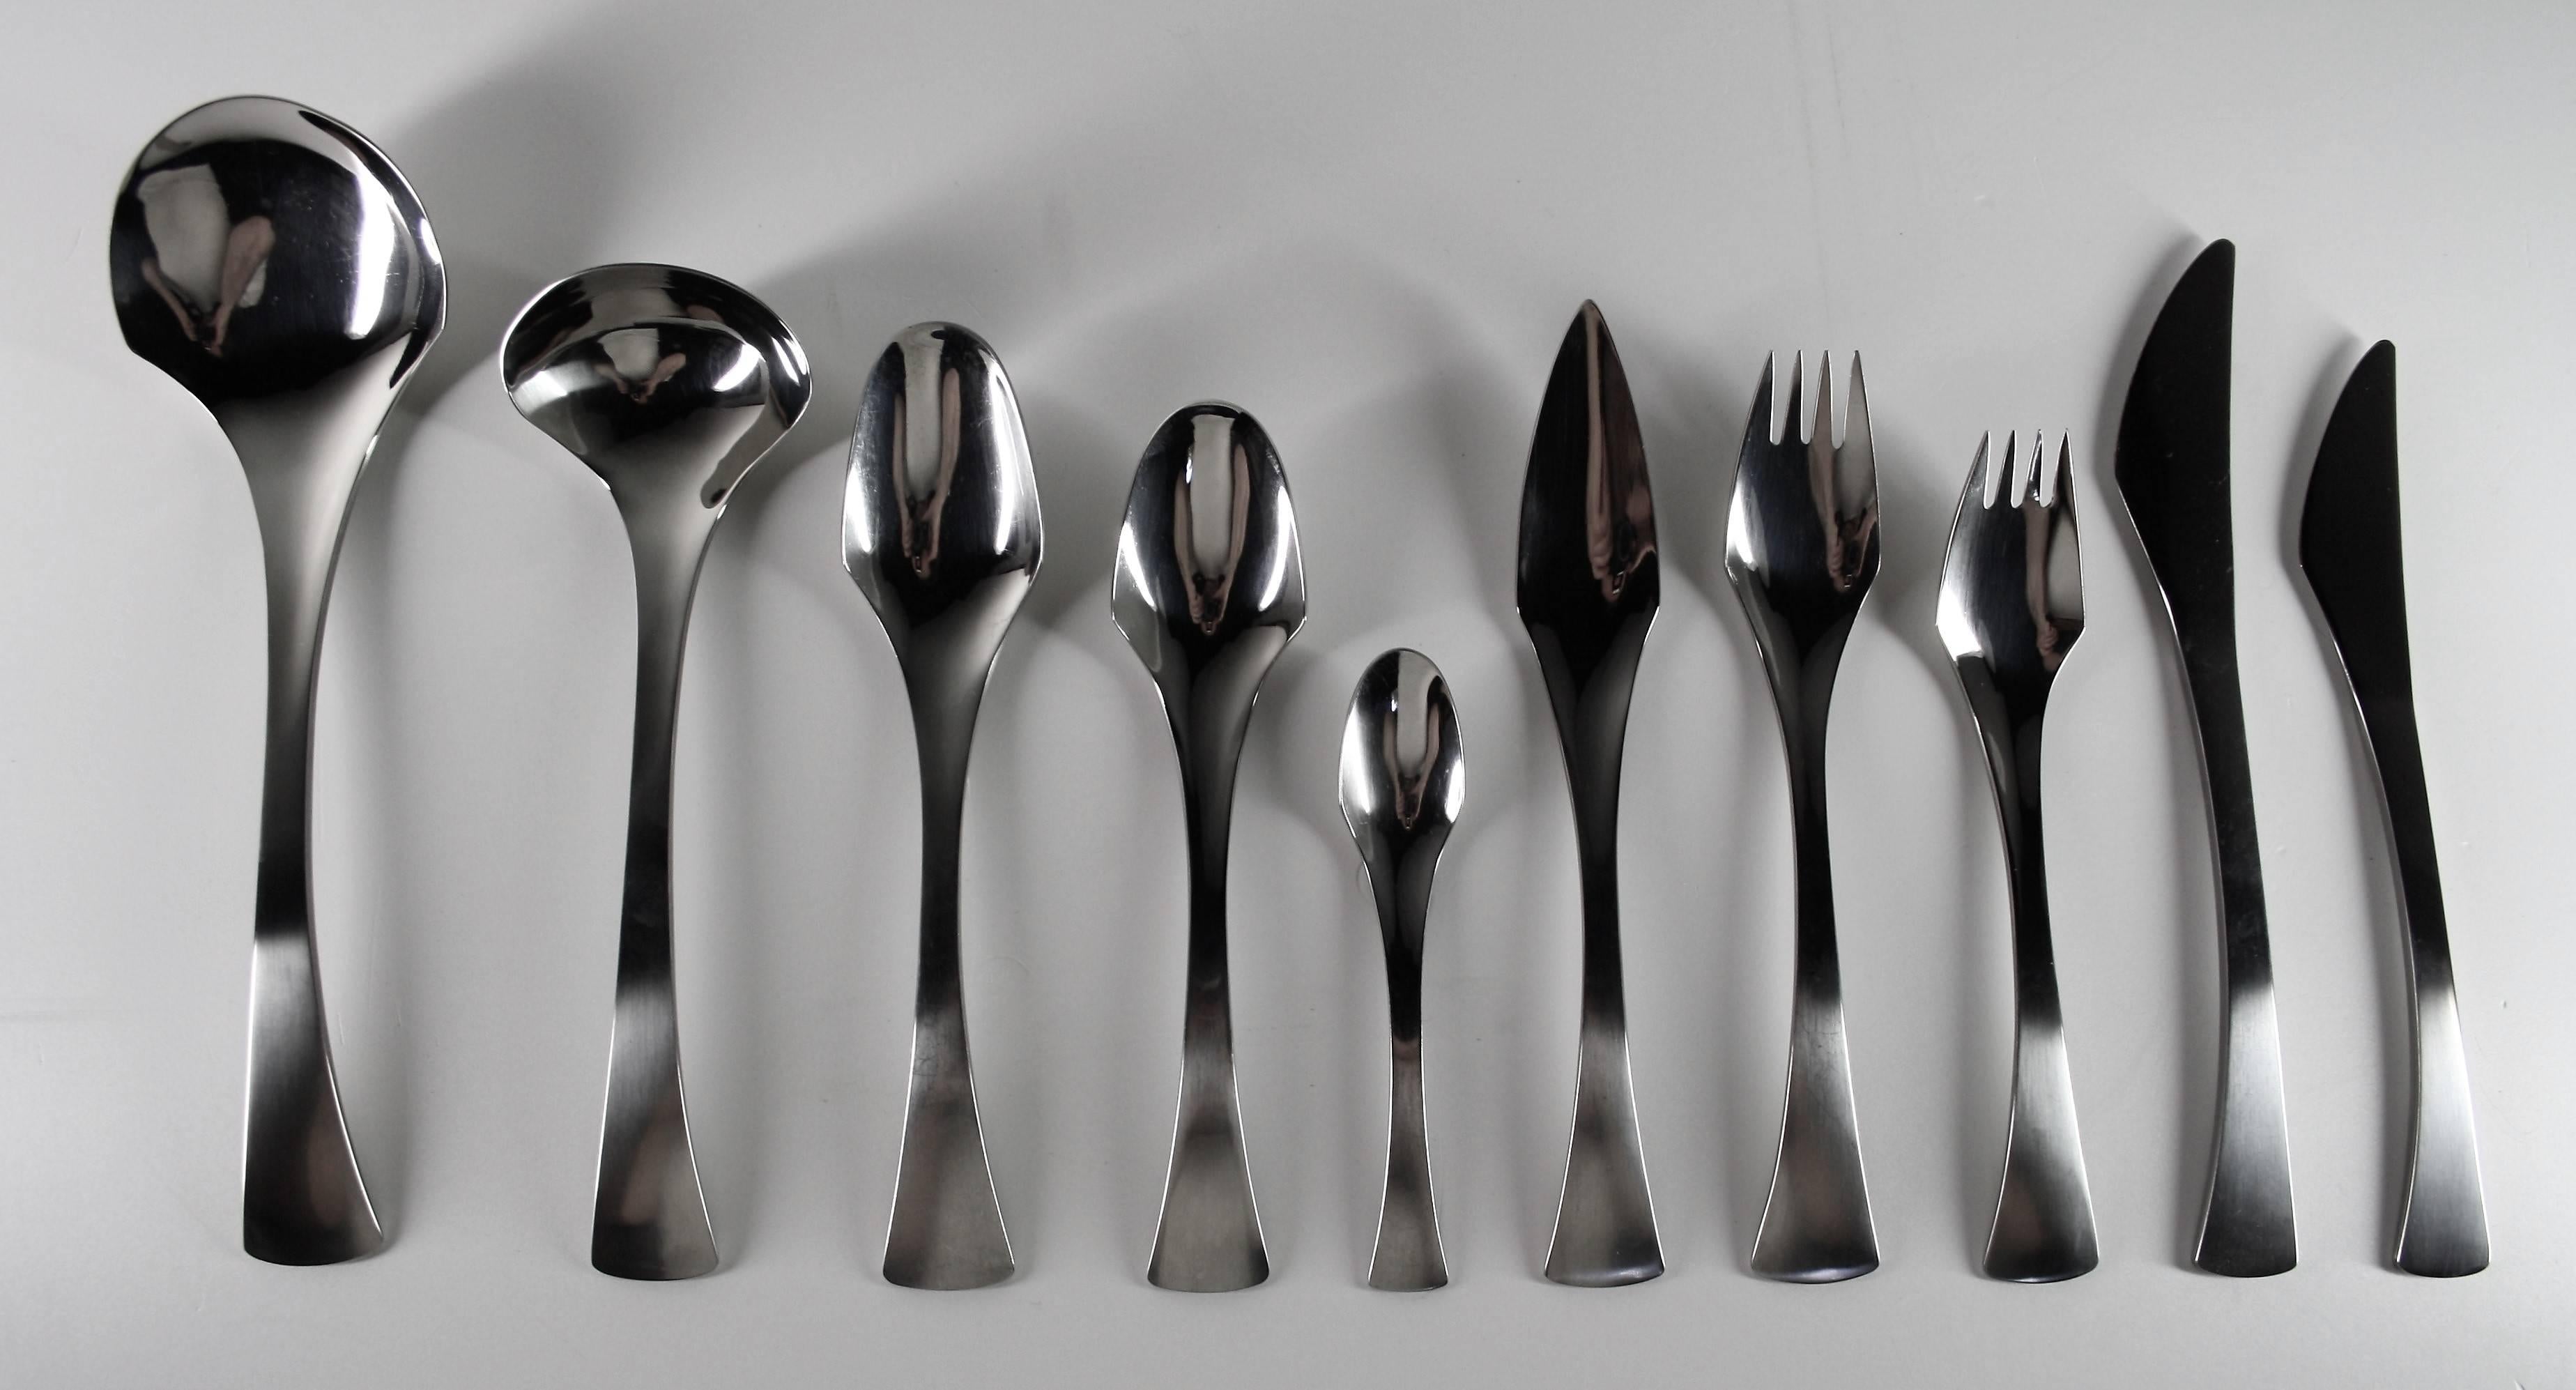 A complete Ib Bluitgen Danish stainless steel flatware dinner set of 87 pieces in their original box (one storage box is missing).
Ib Bluitgen worked for Georg Jensen in his early days.
The complete set is in perfect condition.
The set was never